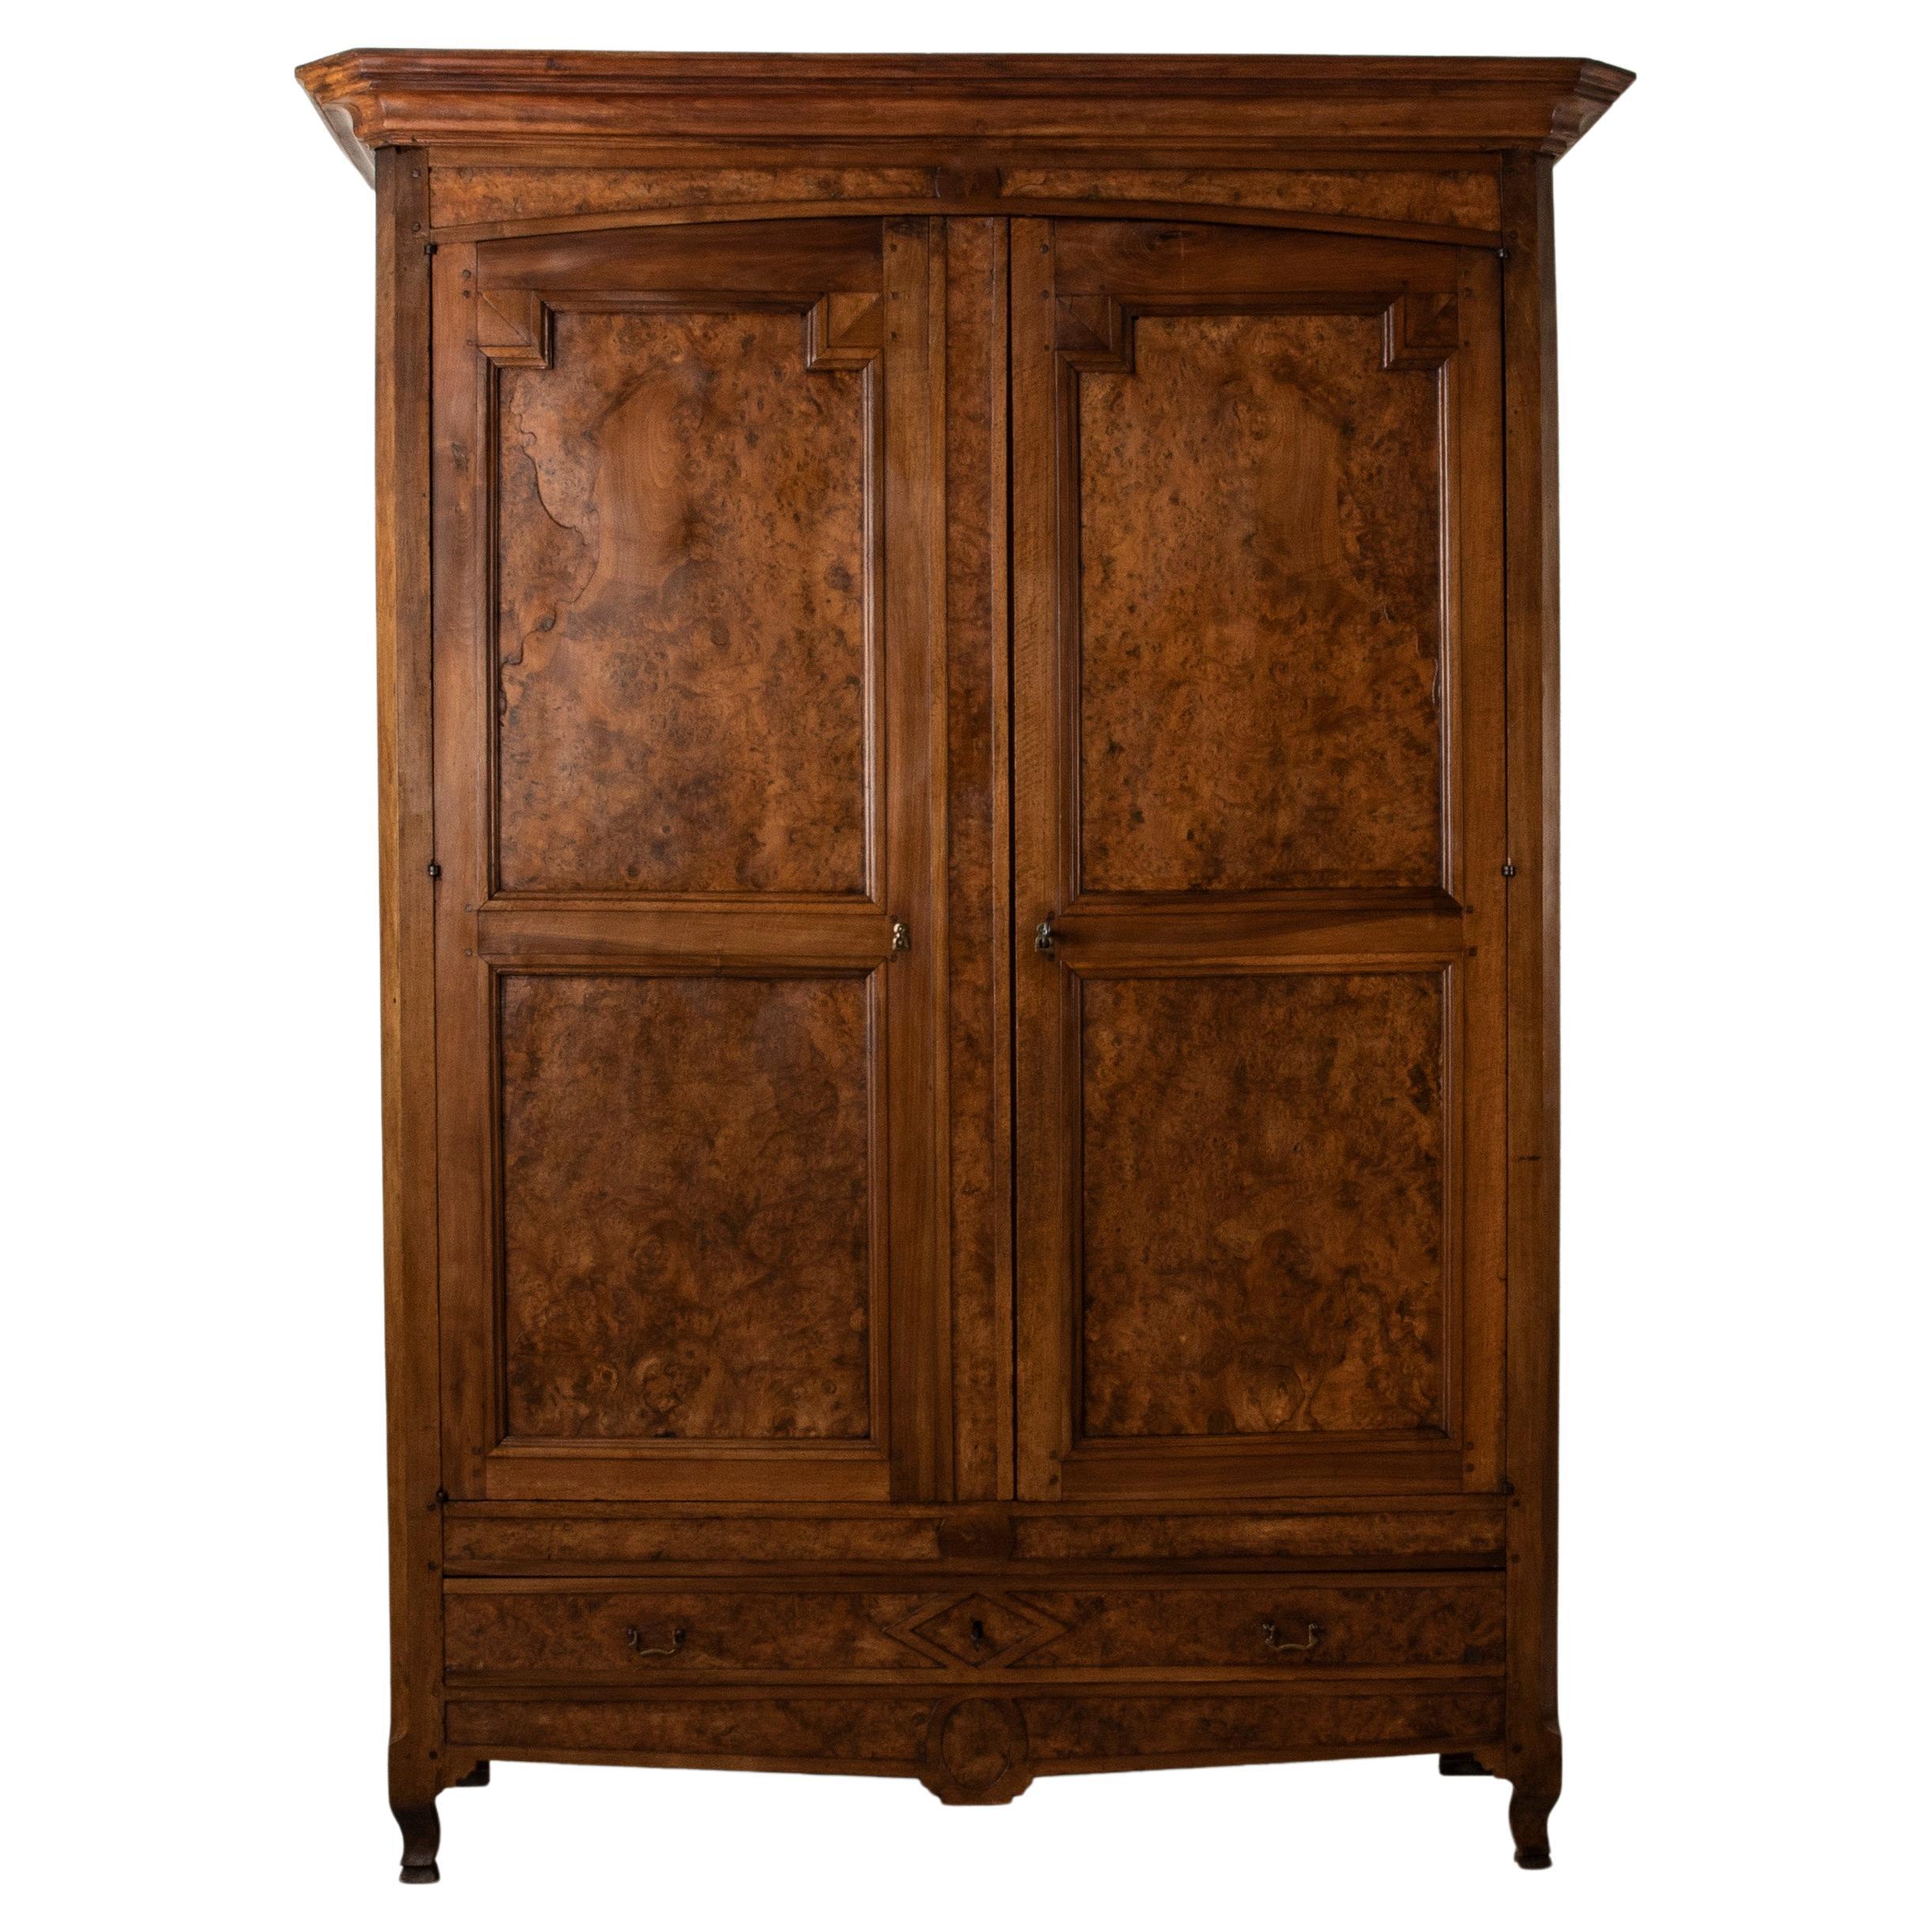 Large Early 19th Century French Burl Elm Armoire or Wardrobe, Hand Forged Locks